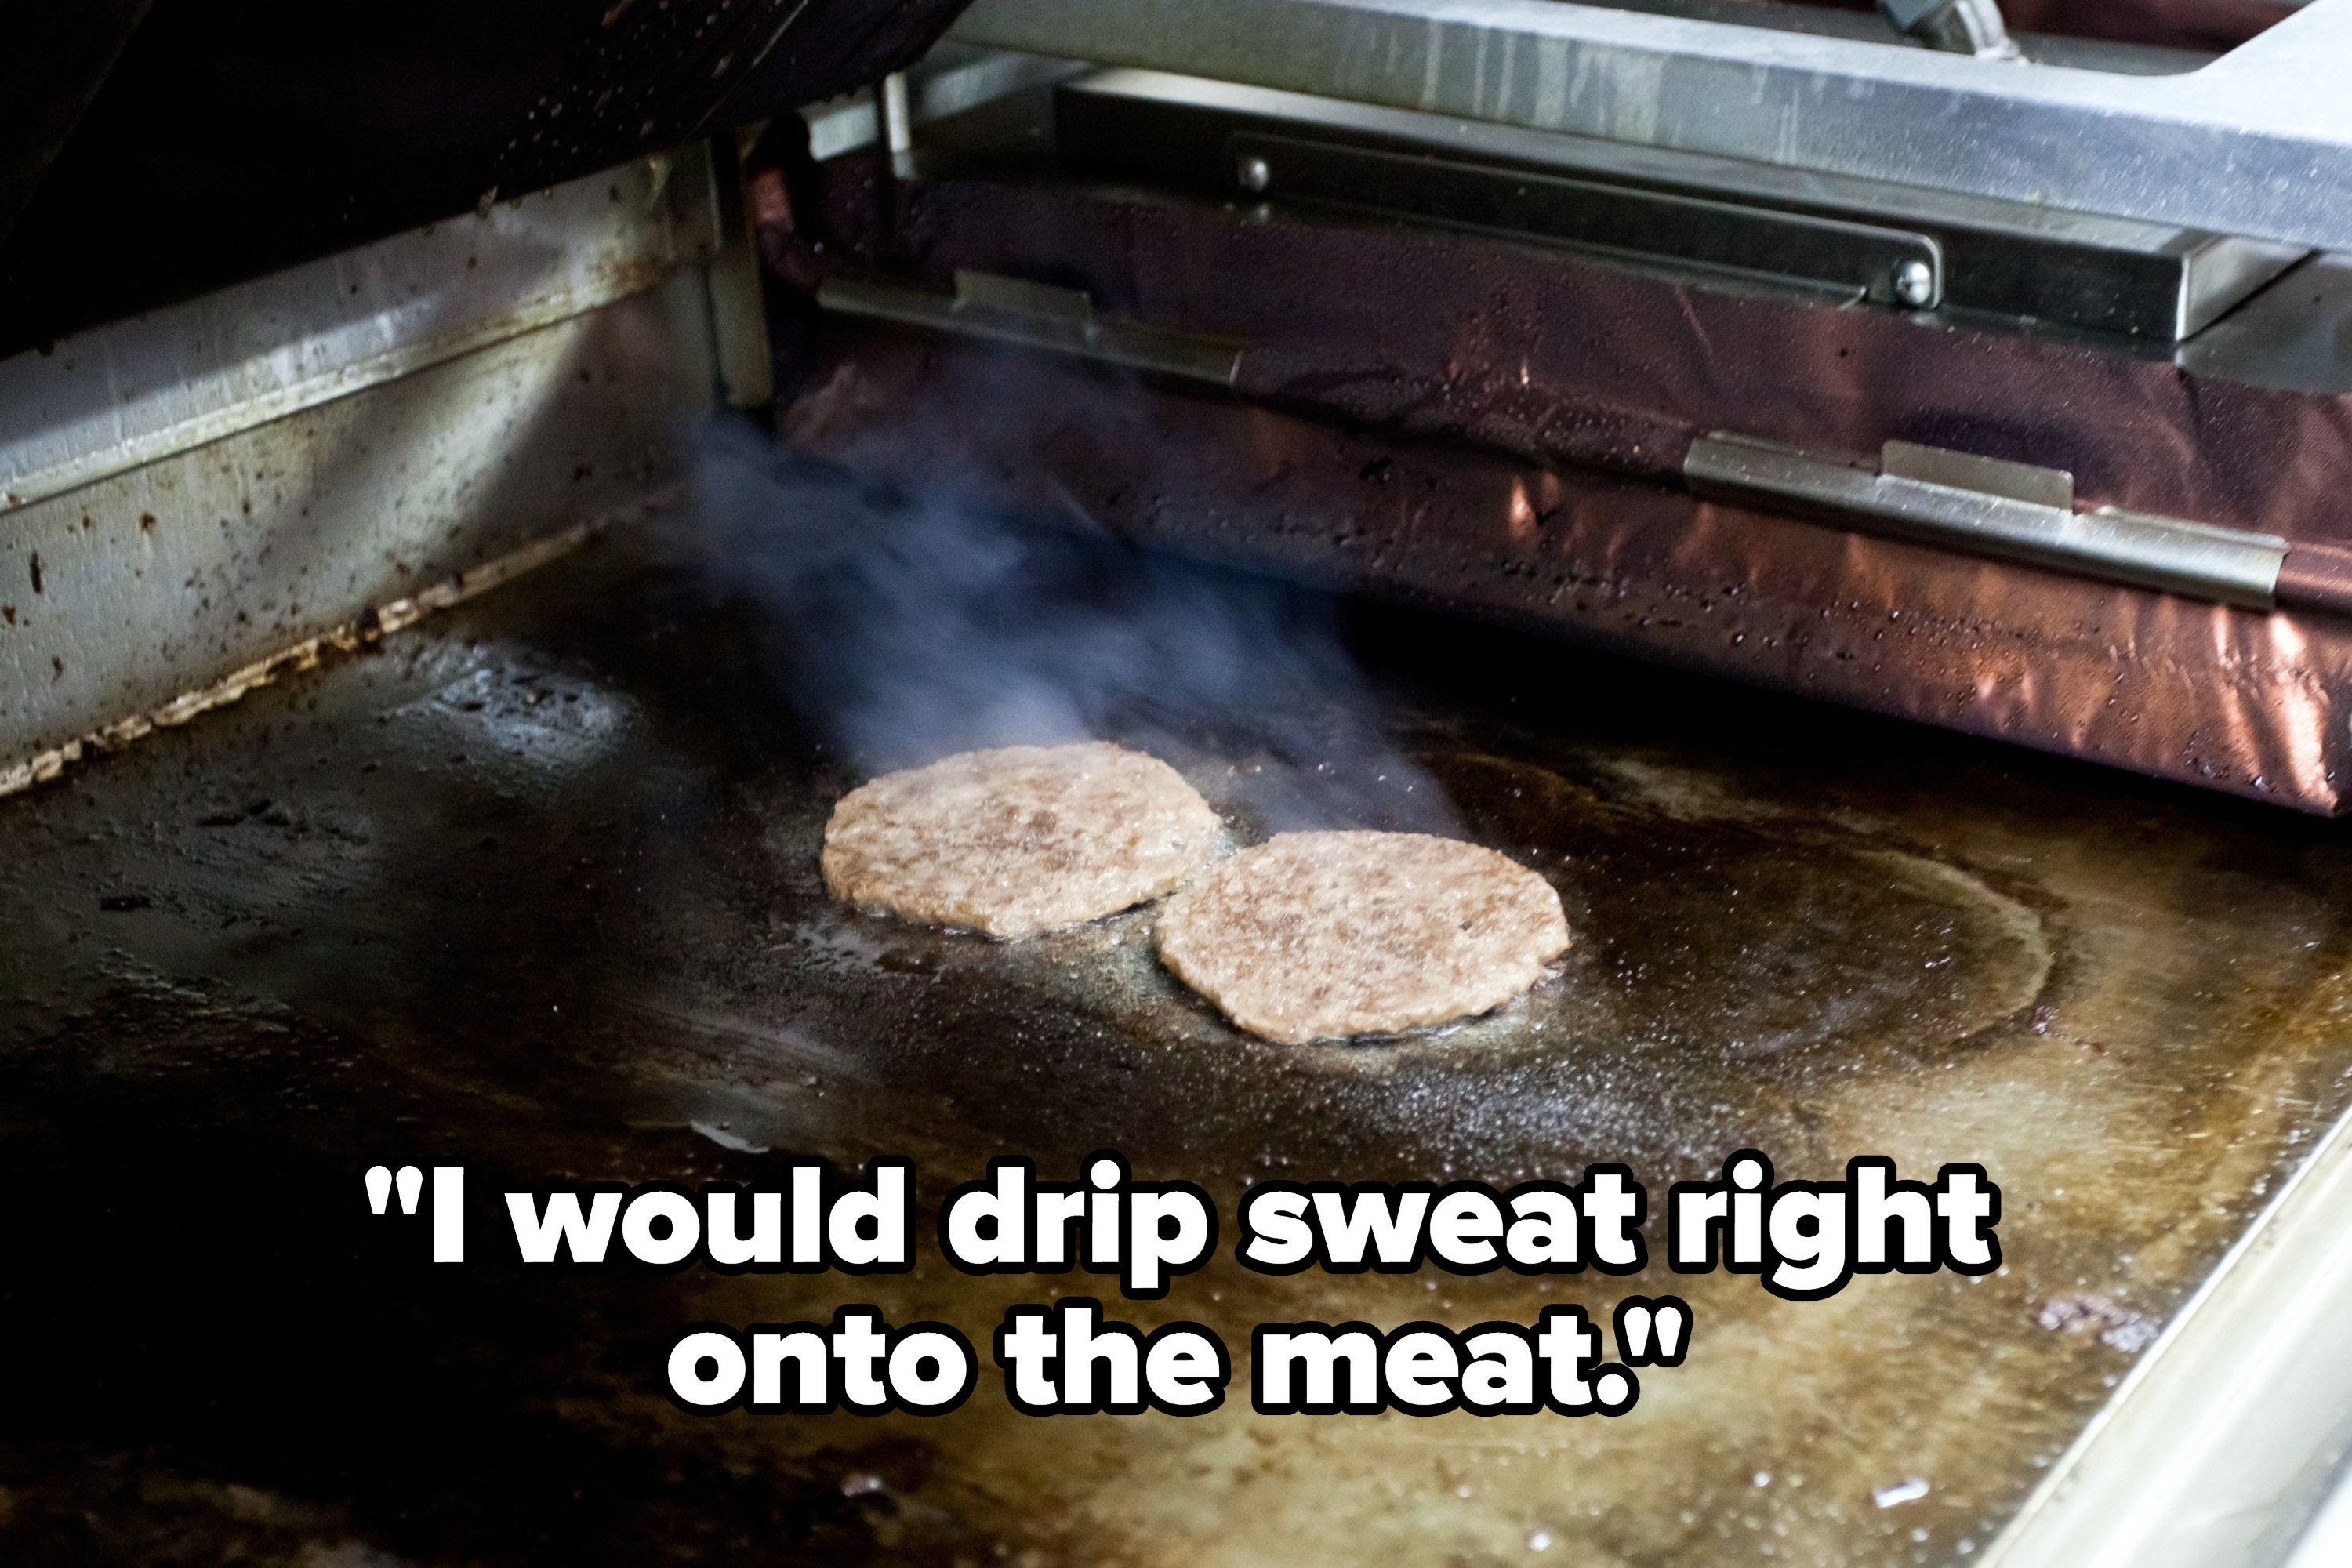 &quot;I would drip sweat right onto the meat&quot; over patties cooking on a grill